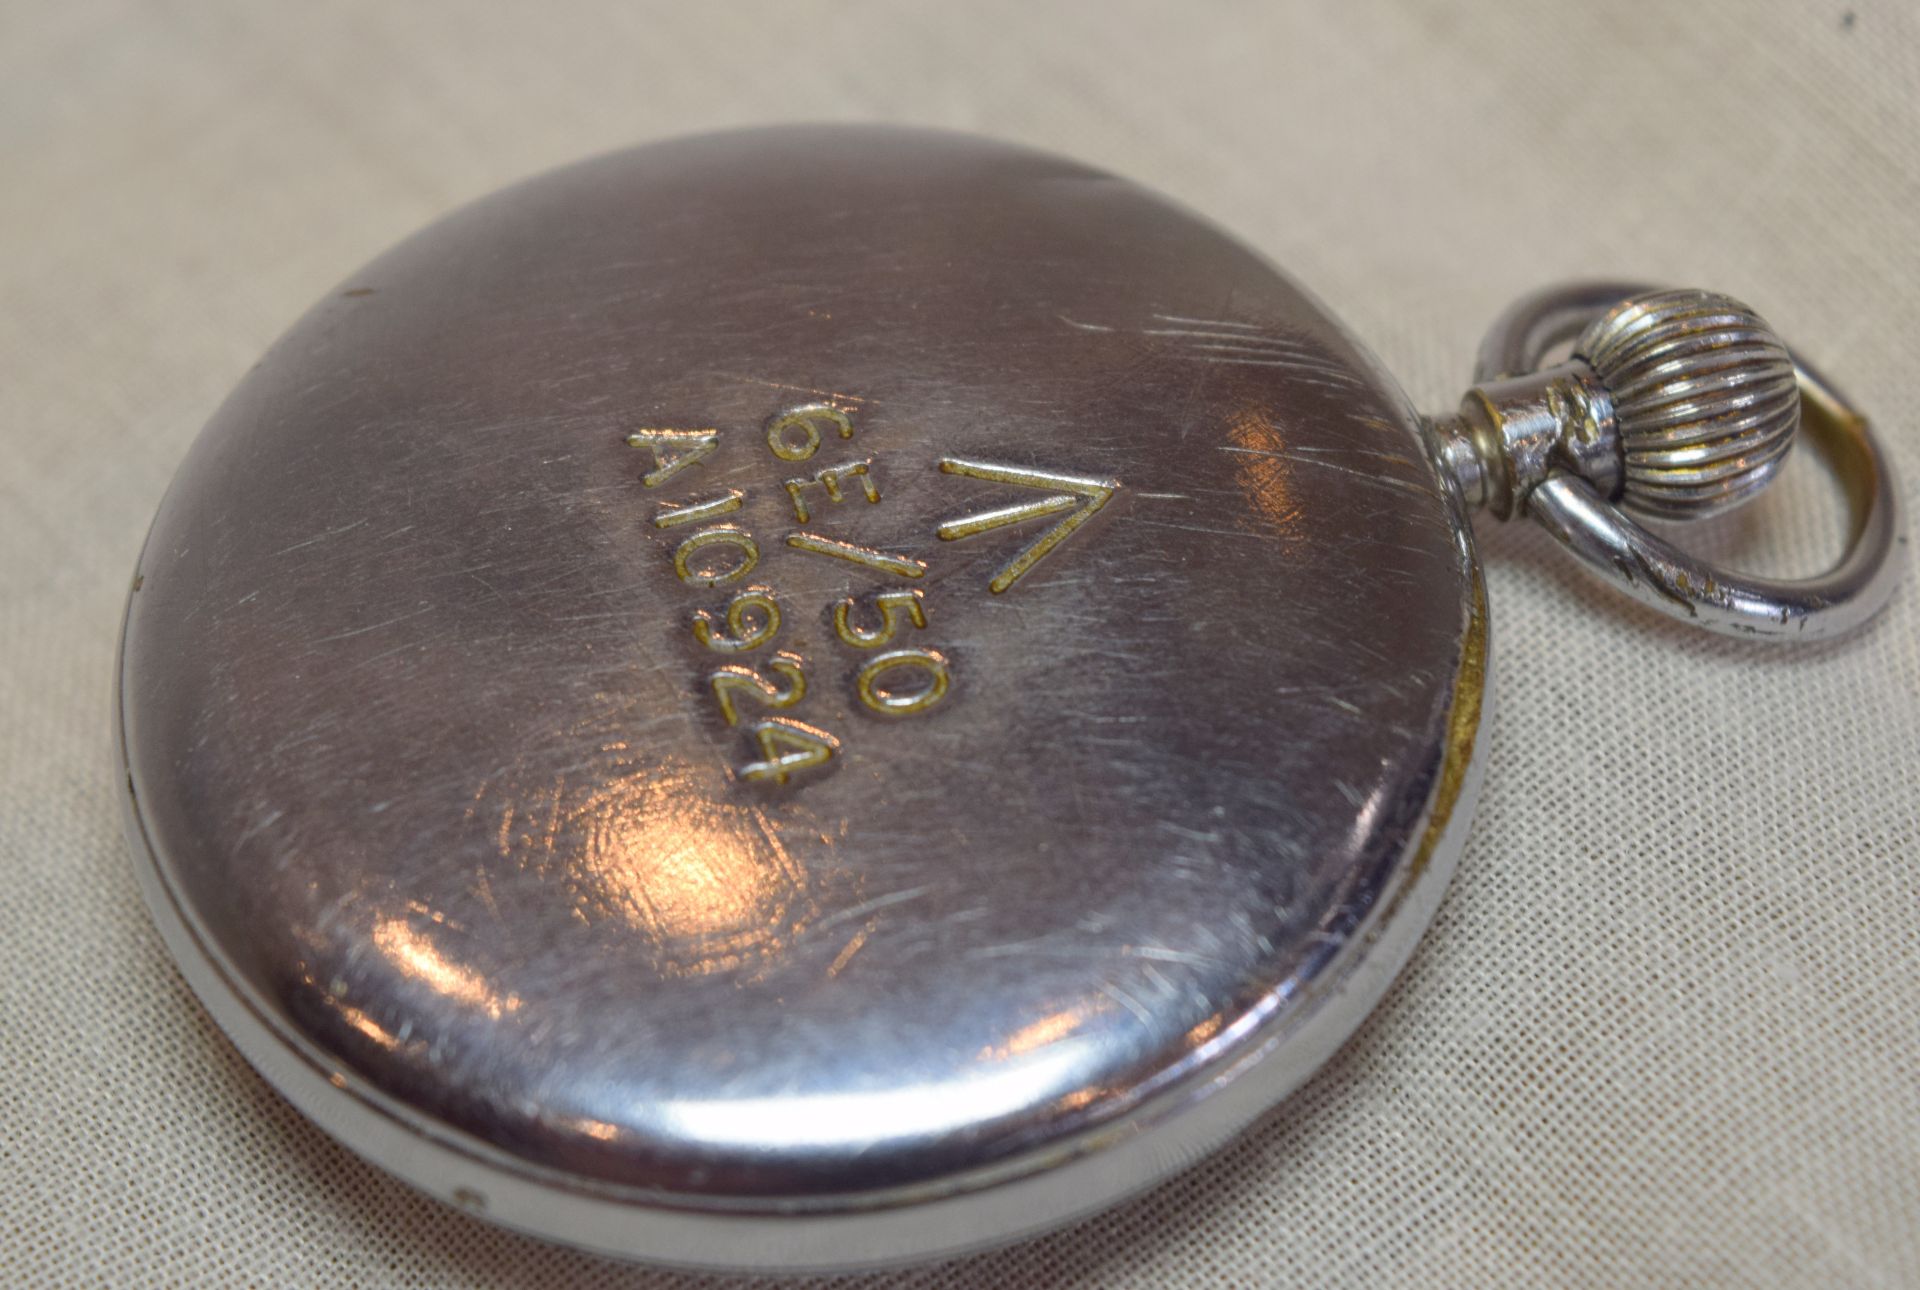 Jaeger LeCoultre WW2 Military Pocket Watch - Image 5 of 6